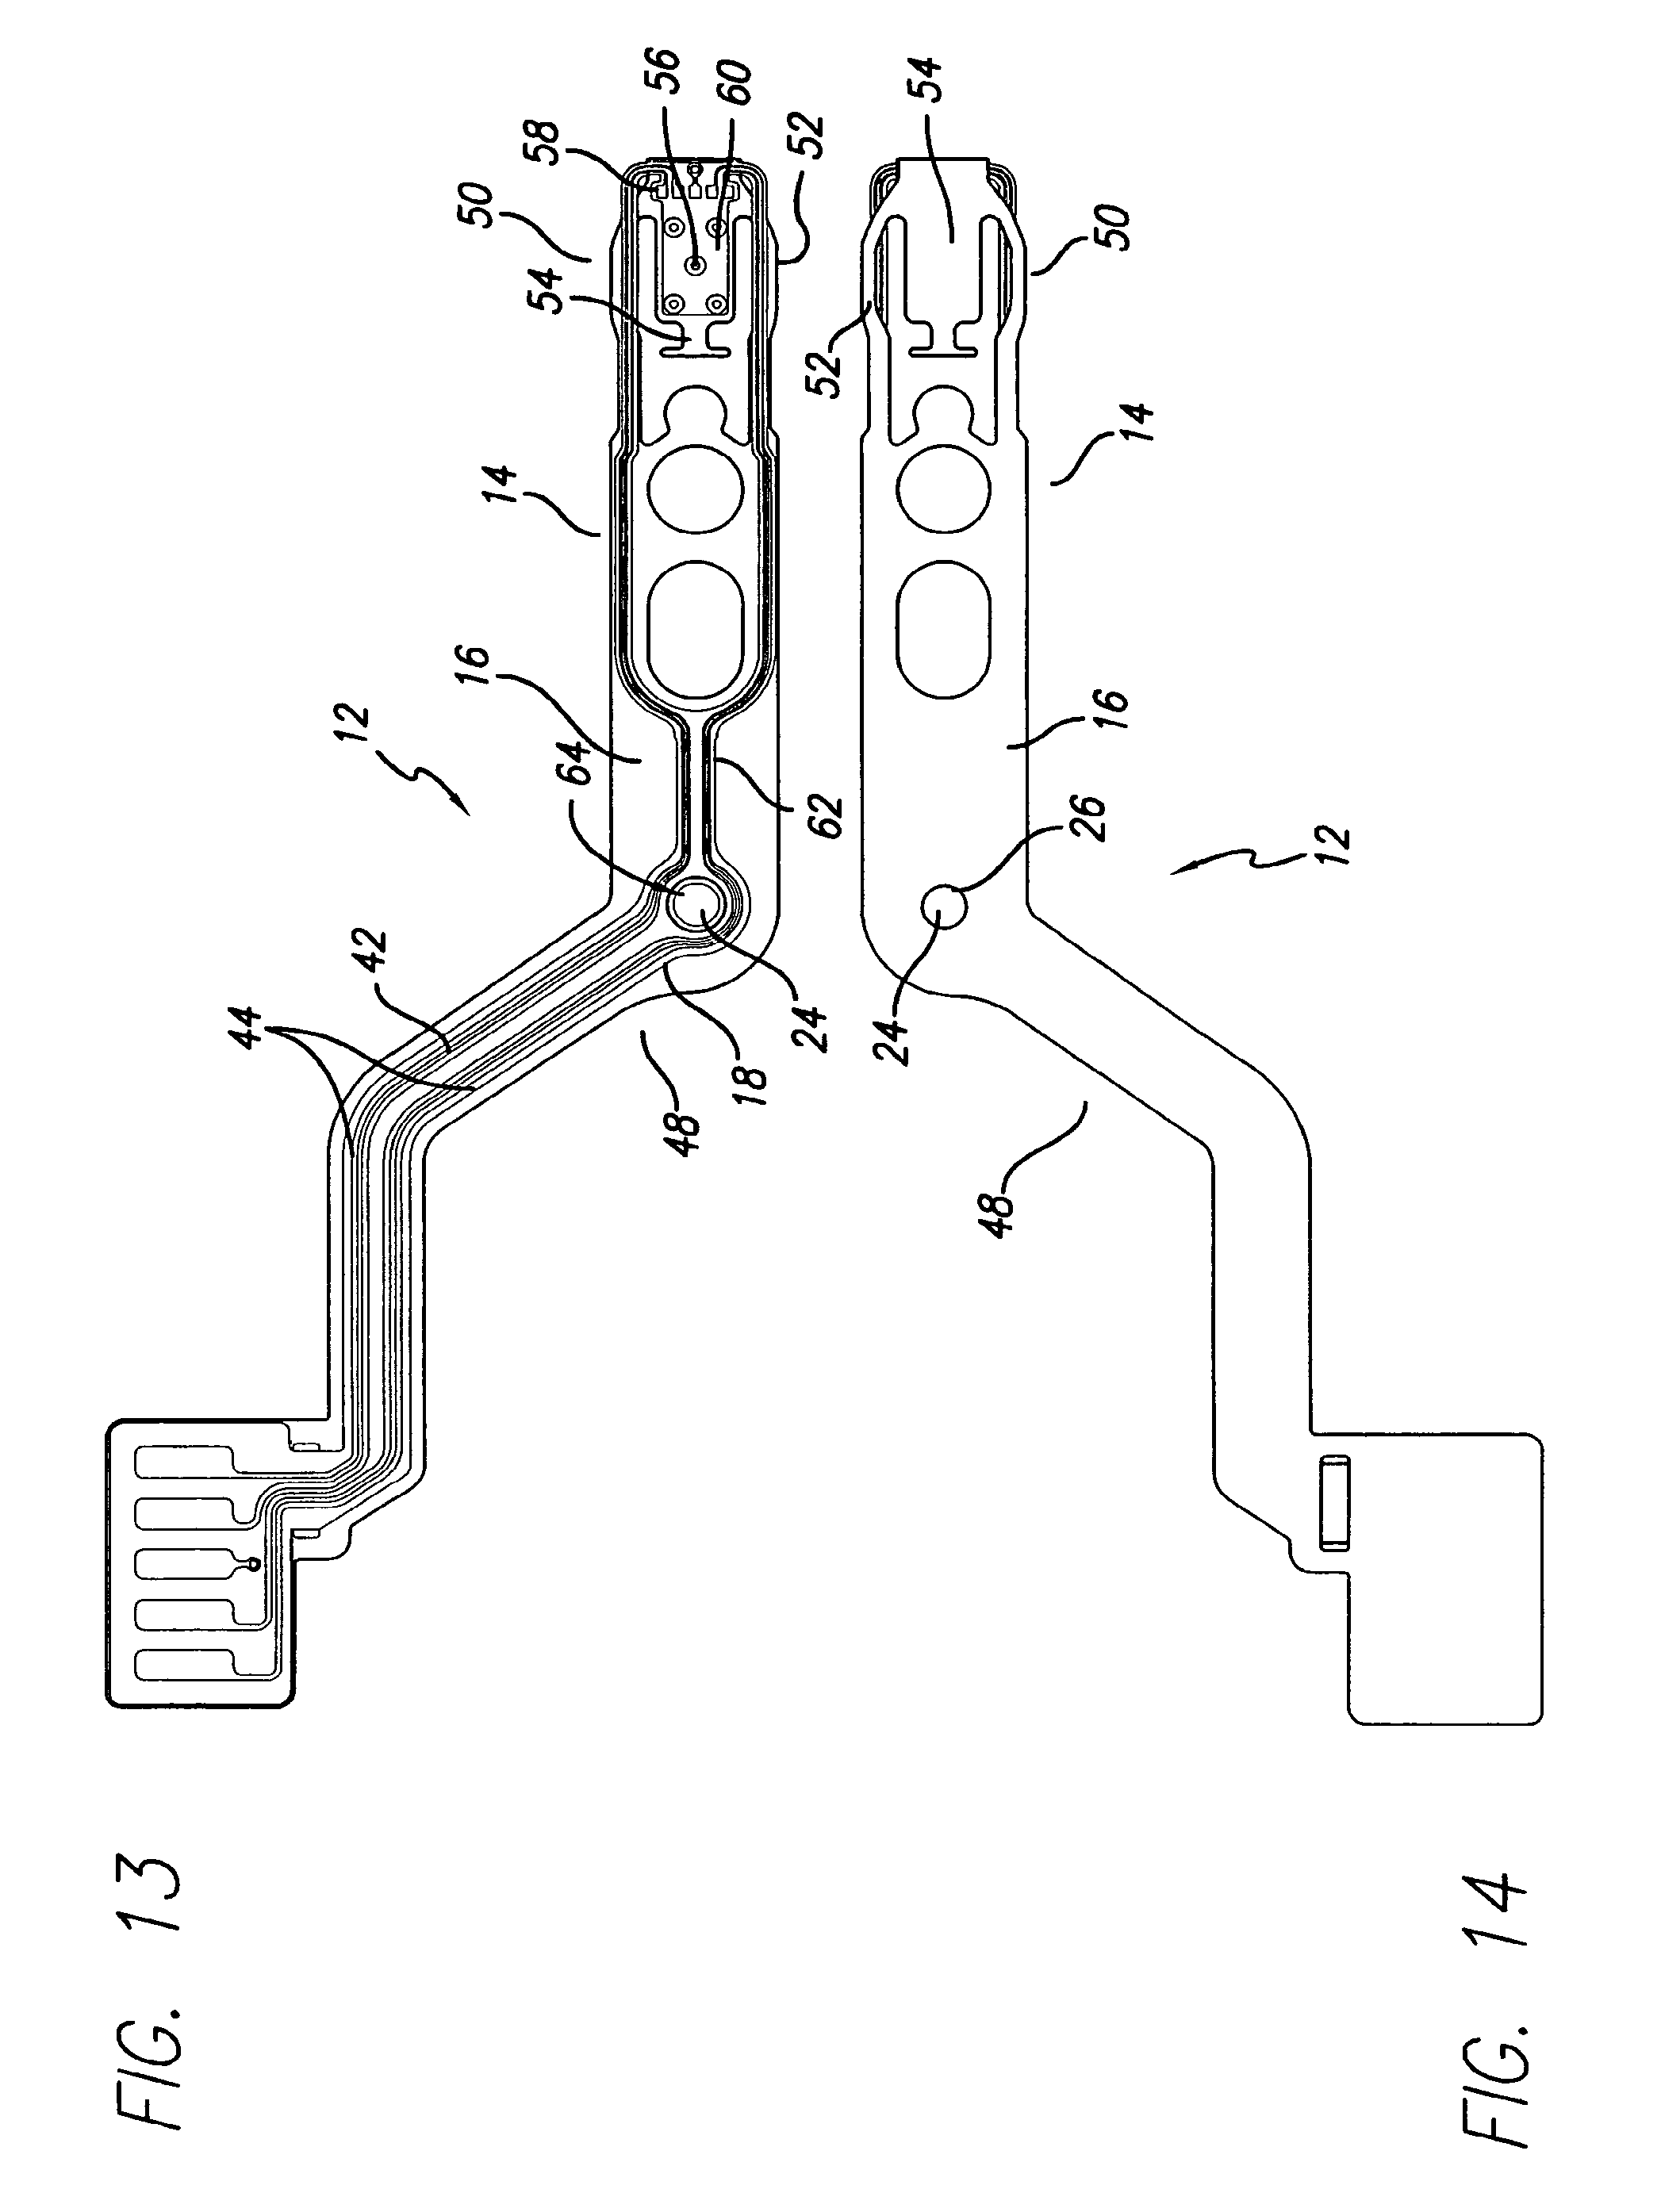 Low impedance, high bandwidth disk drive suspension circuit